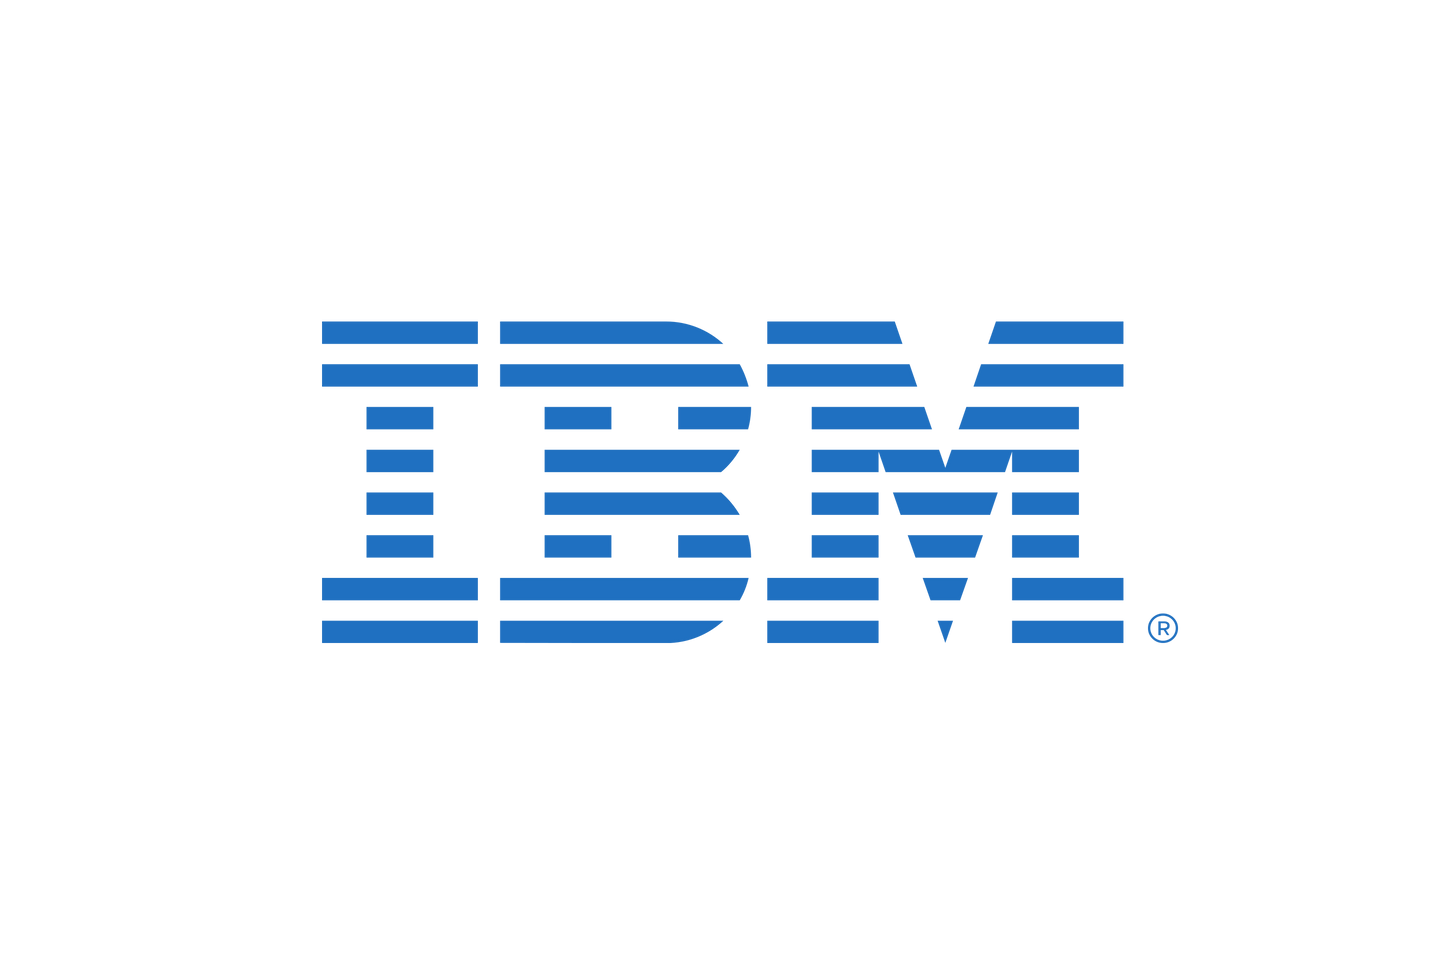 IBM Z and LinuxONE Subscription 1 US Dollar per Month